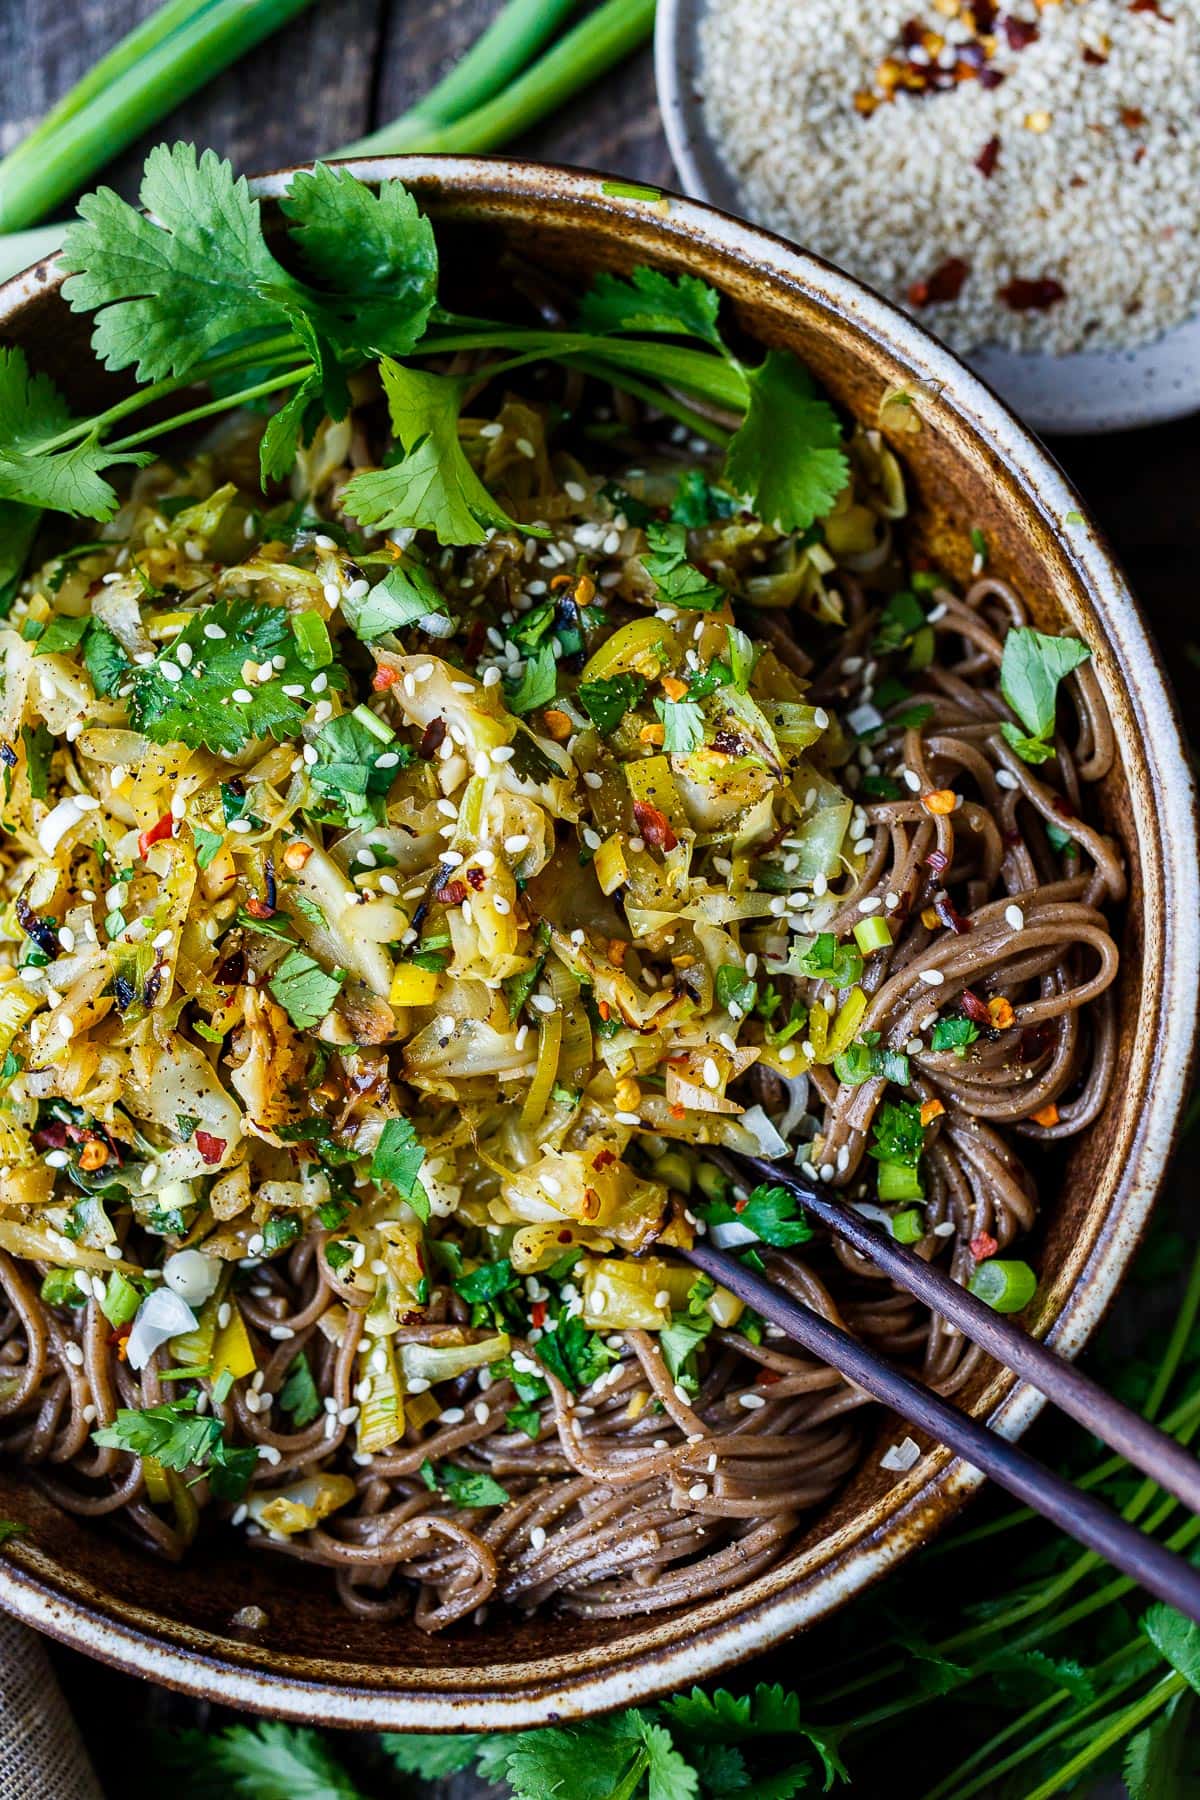 This quick and simple Cabbage Stir Fry is humble yet overflowing with savory flavor. Full of amazing health benefits, cabbage takes center stage here transforming into a luscious side dish or perfect topping for rice or buckwheat soba noodles. Ready to serve in about 30 minutes!